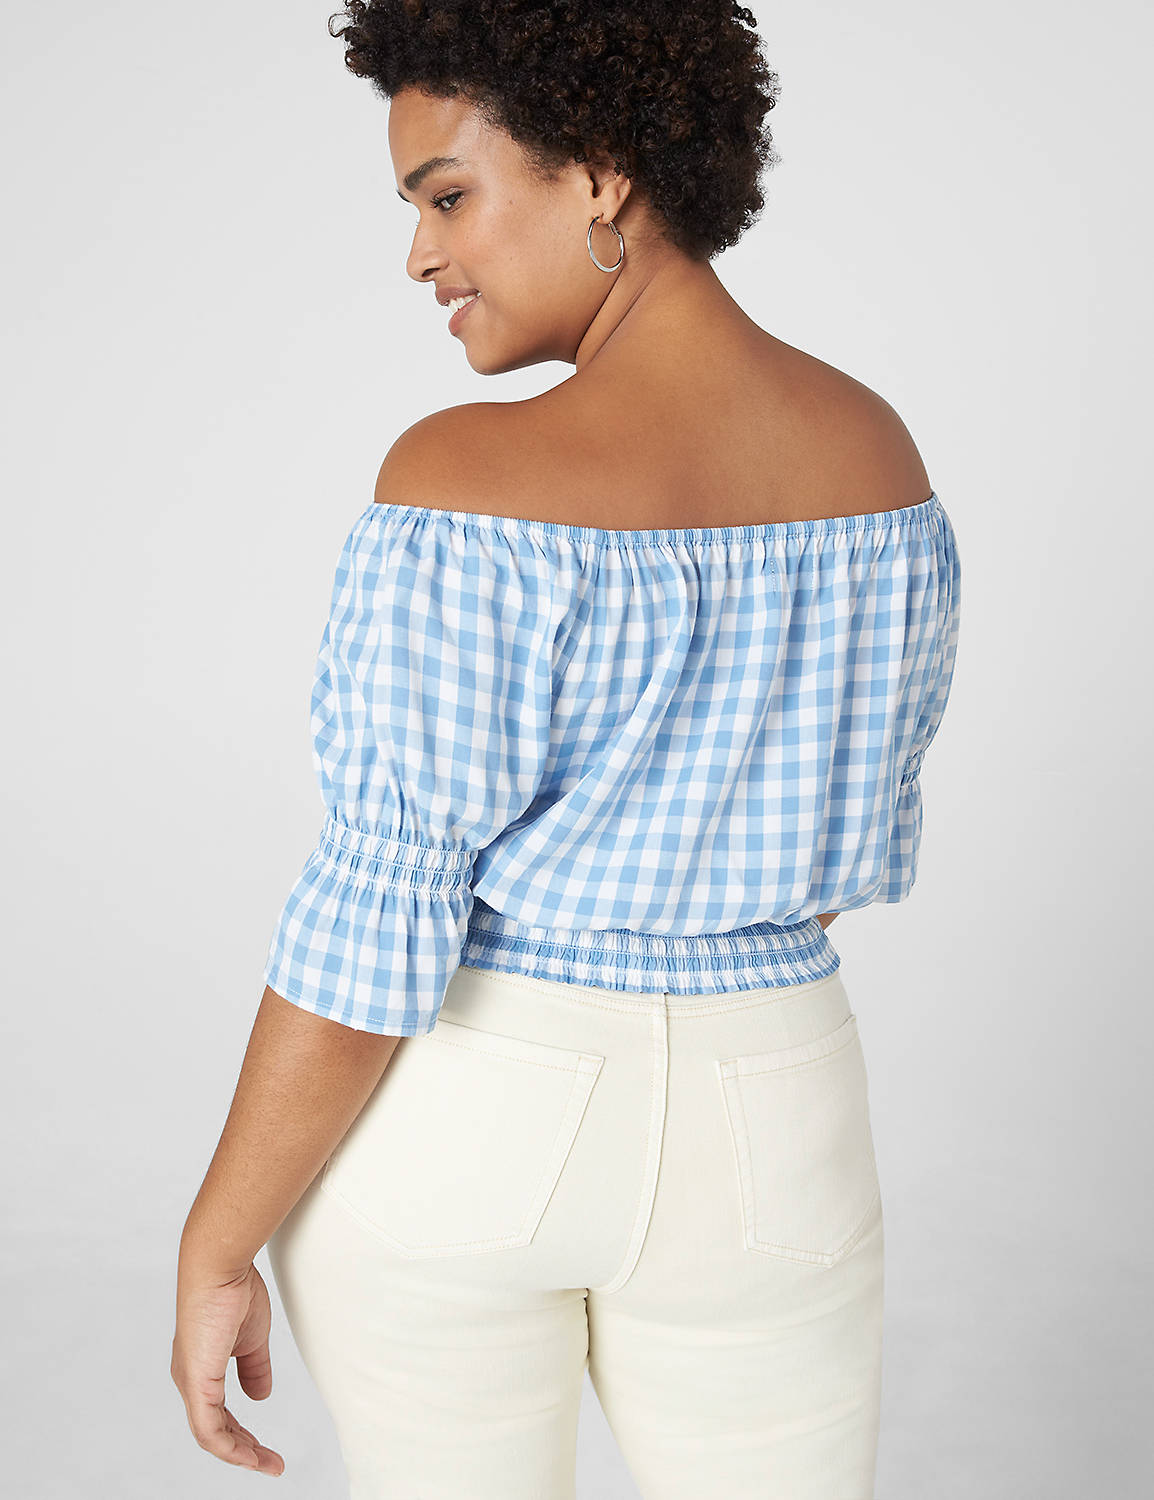 Classic 3/4 Sleeve Off the Shoulder Product Image 2